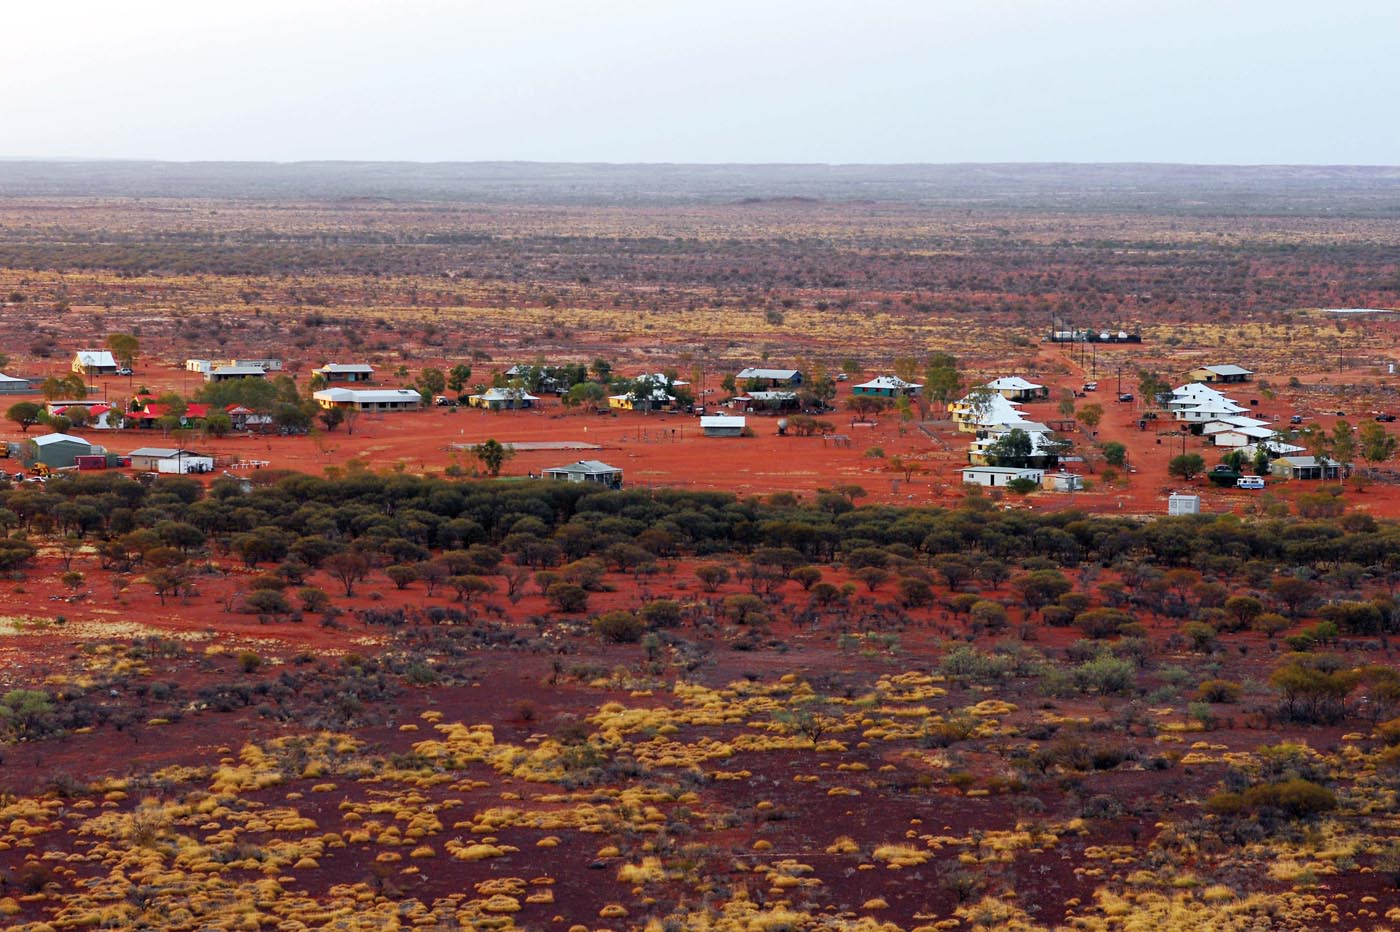 Colour photograph featuring a township surrounded by vast flat land and brush.